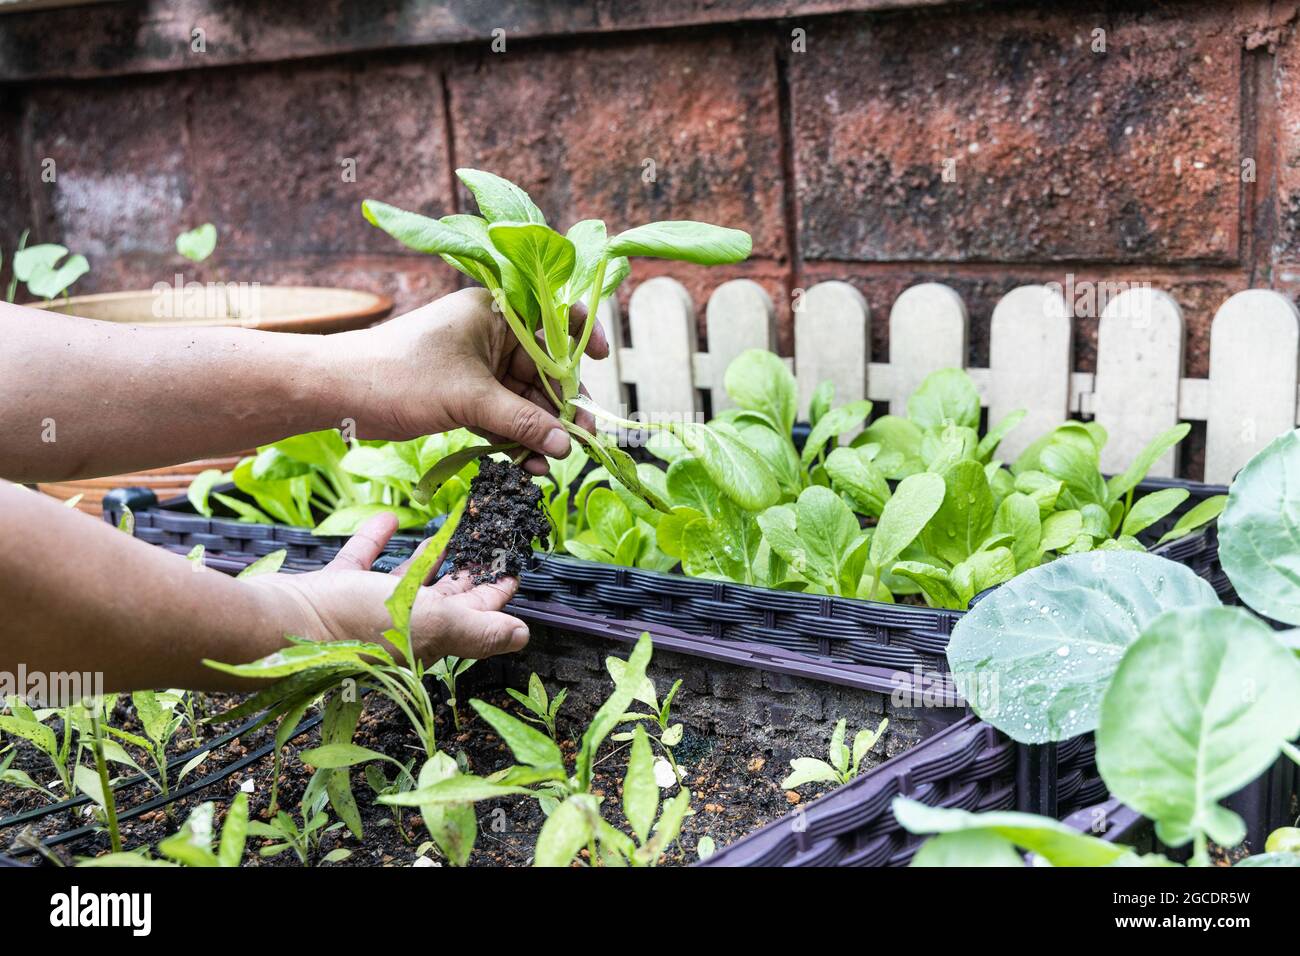 Hand harvesting organic choy sum vegetables grown pon planter box at home garden during covid-19 lockdown Stock Photo